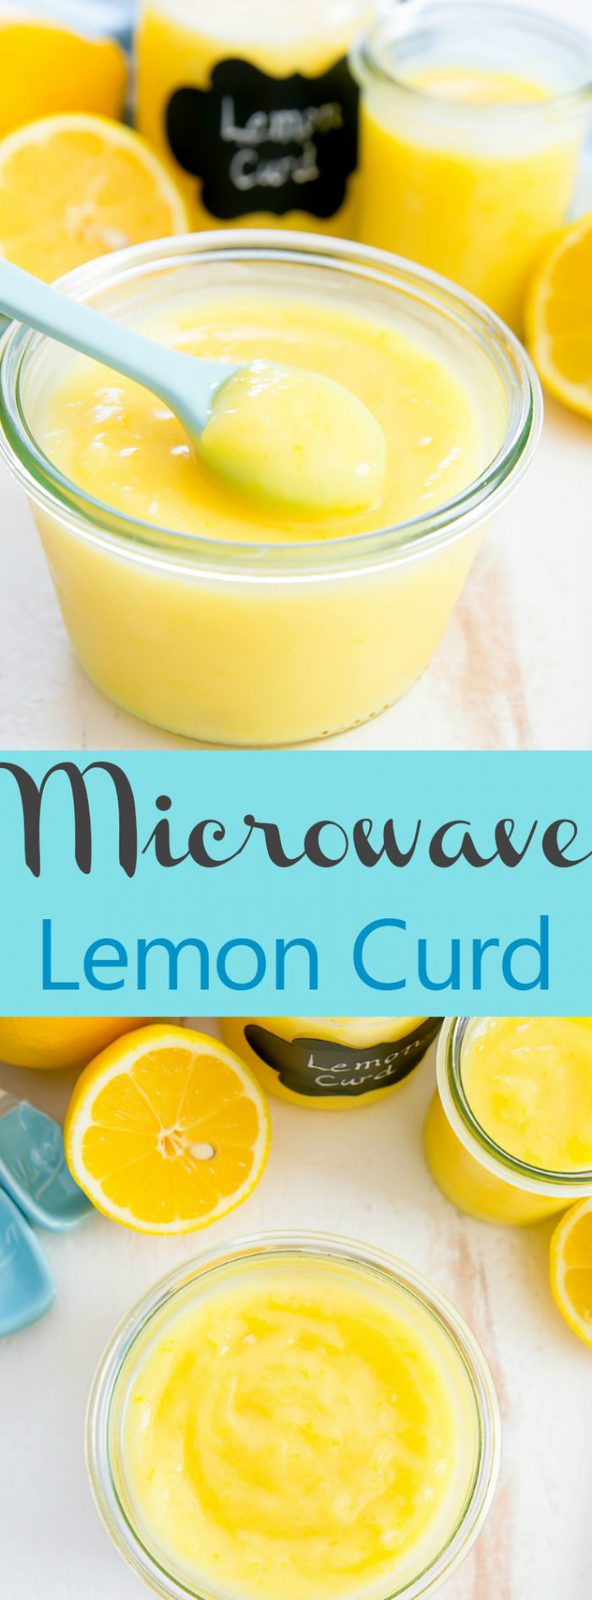 Microwave Lemon Curd. Cooks in 5 minutes.